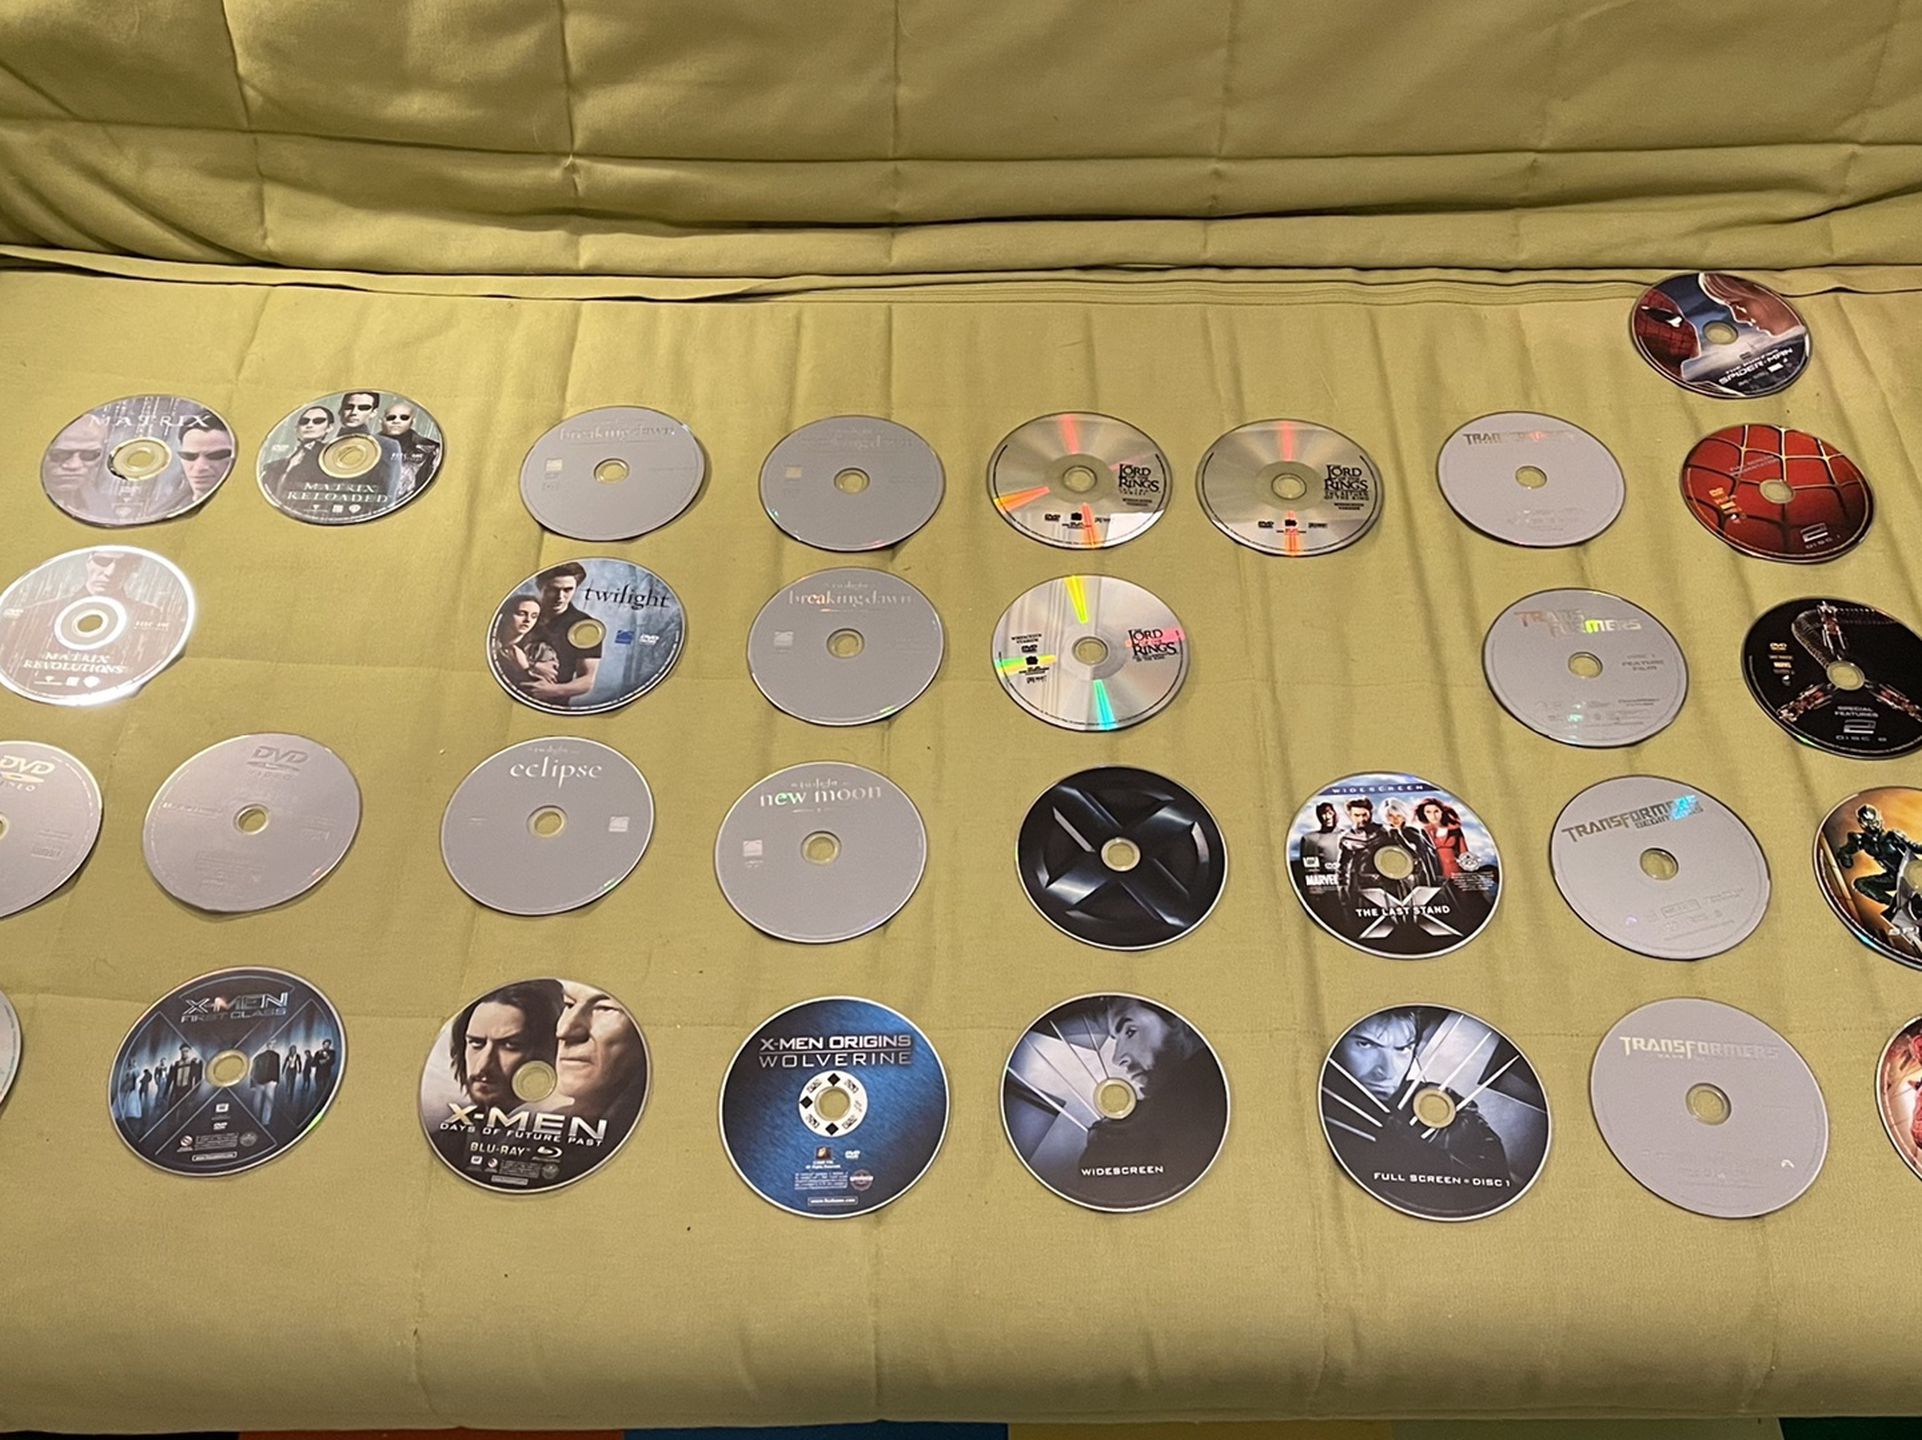 Huge Collection of Theatrical Release DVDs, includes: Spider Man, X-Men, Avengers, The Matrix, Lord of the Rings, Transformers, Twilight